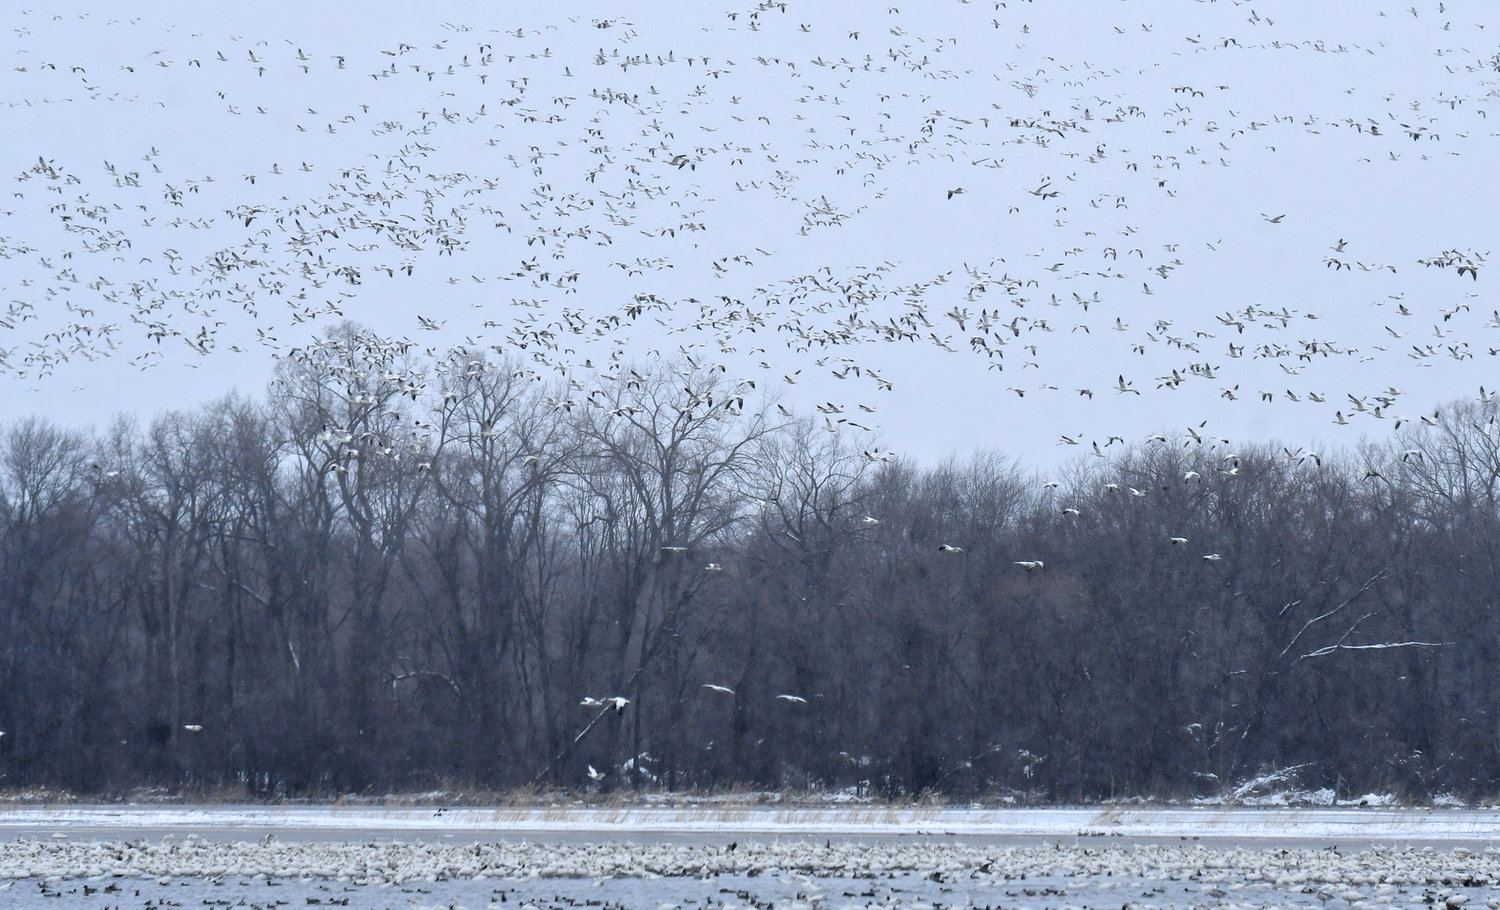 Hundreds of thousands of snow geese take off from Muck Flats near Montezuma Wildlife Refuge Sunday afternoon.